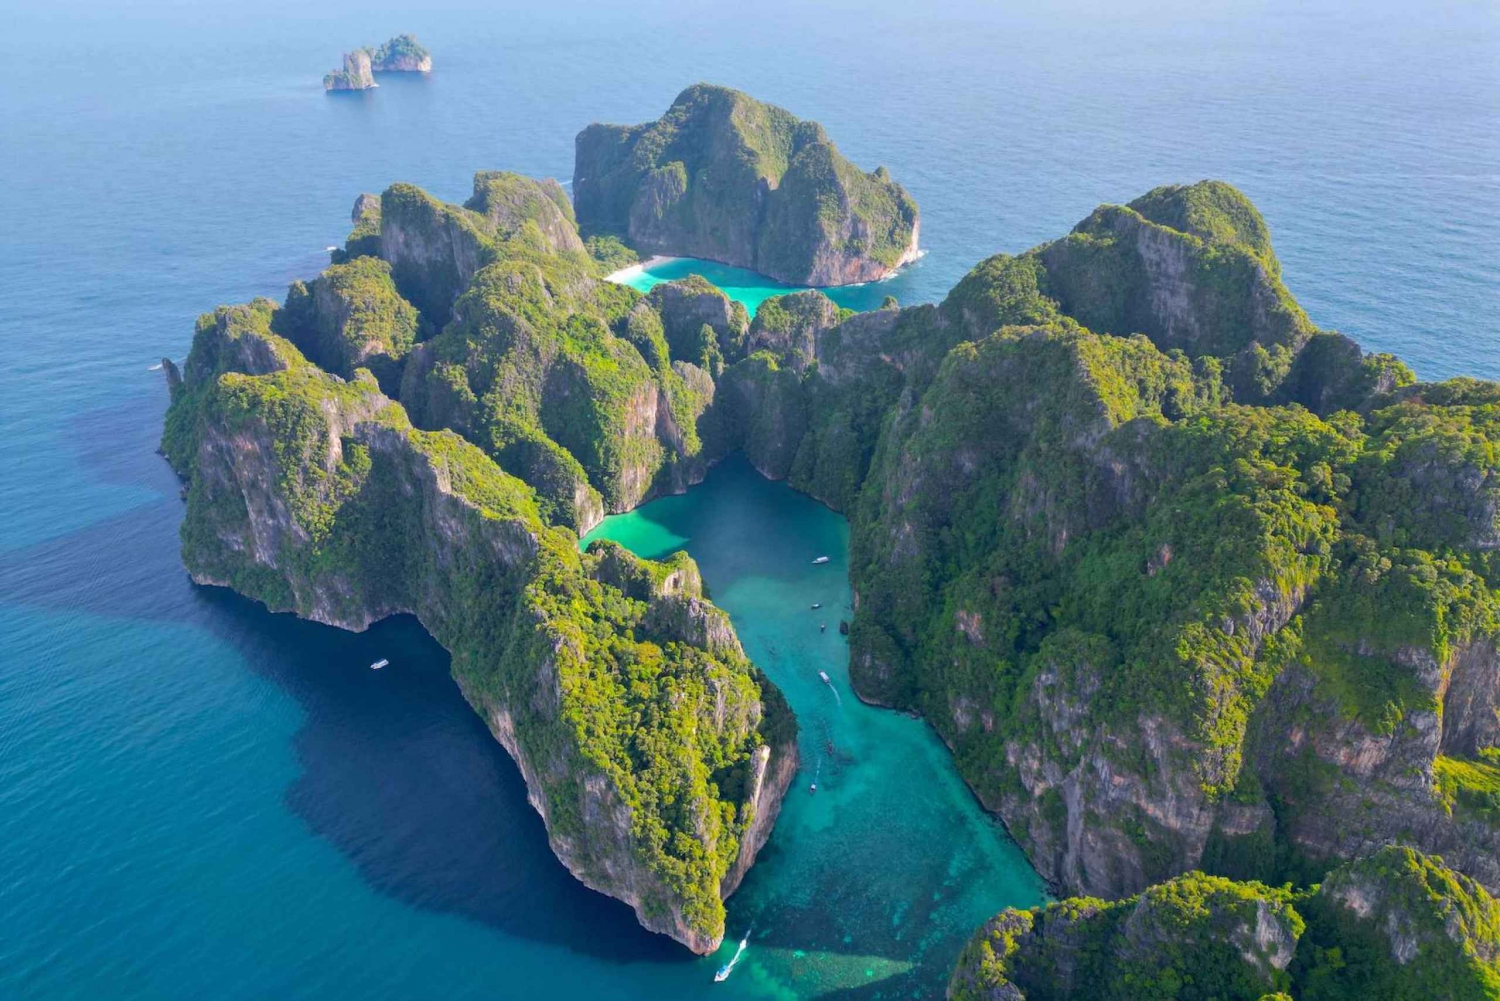 From Krabi to Phuket with Private Longtail Tour in Phi Phi